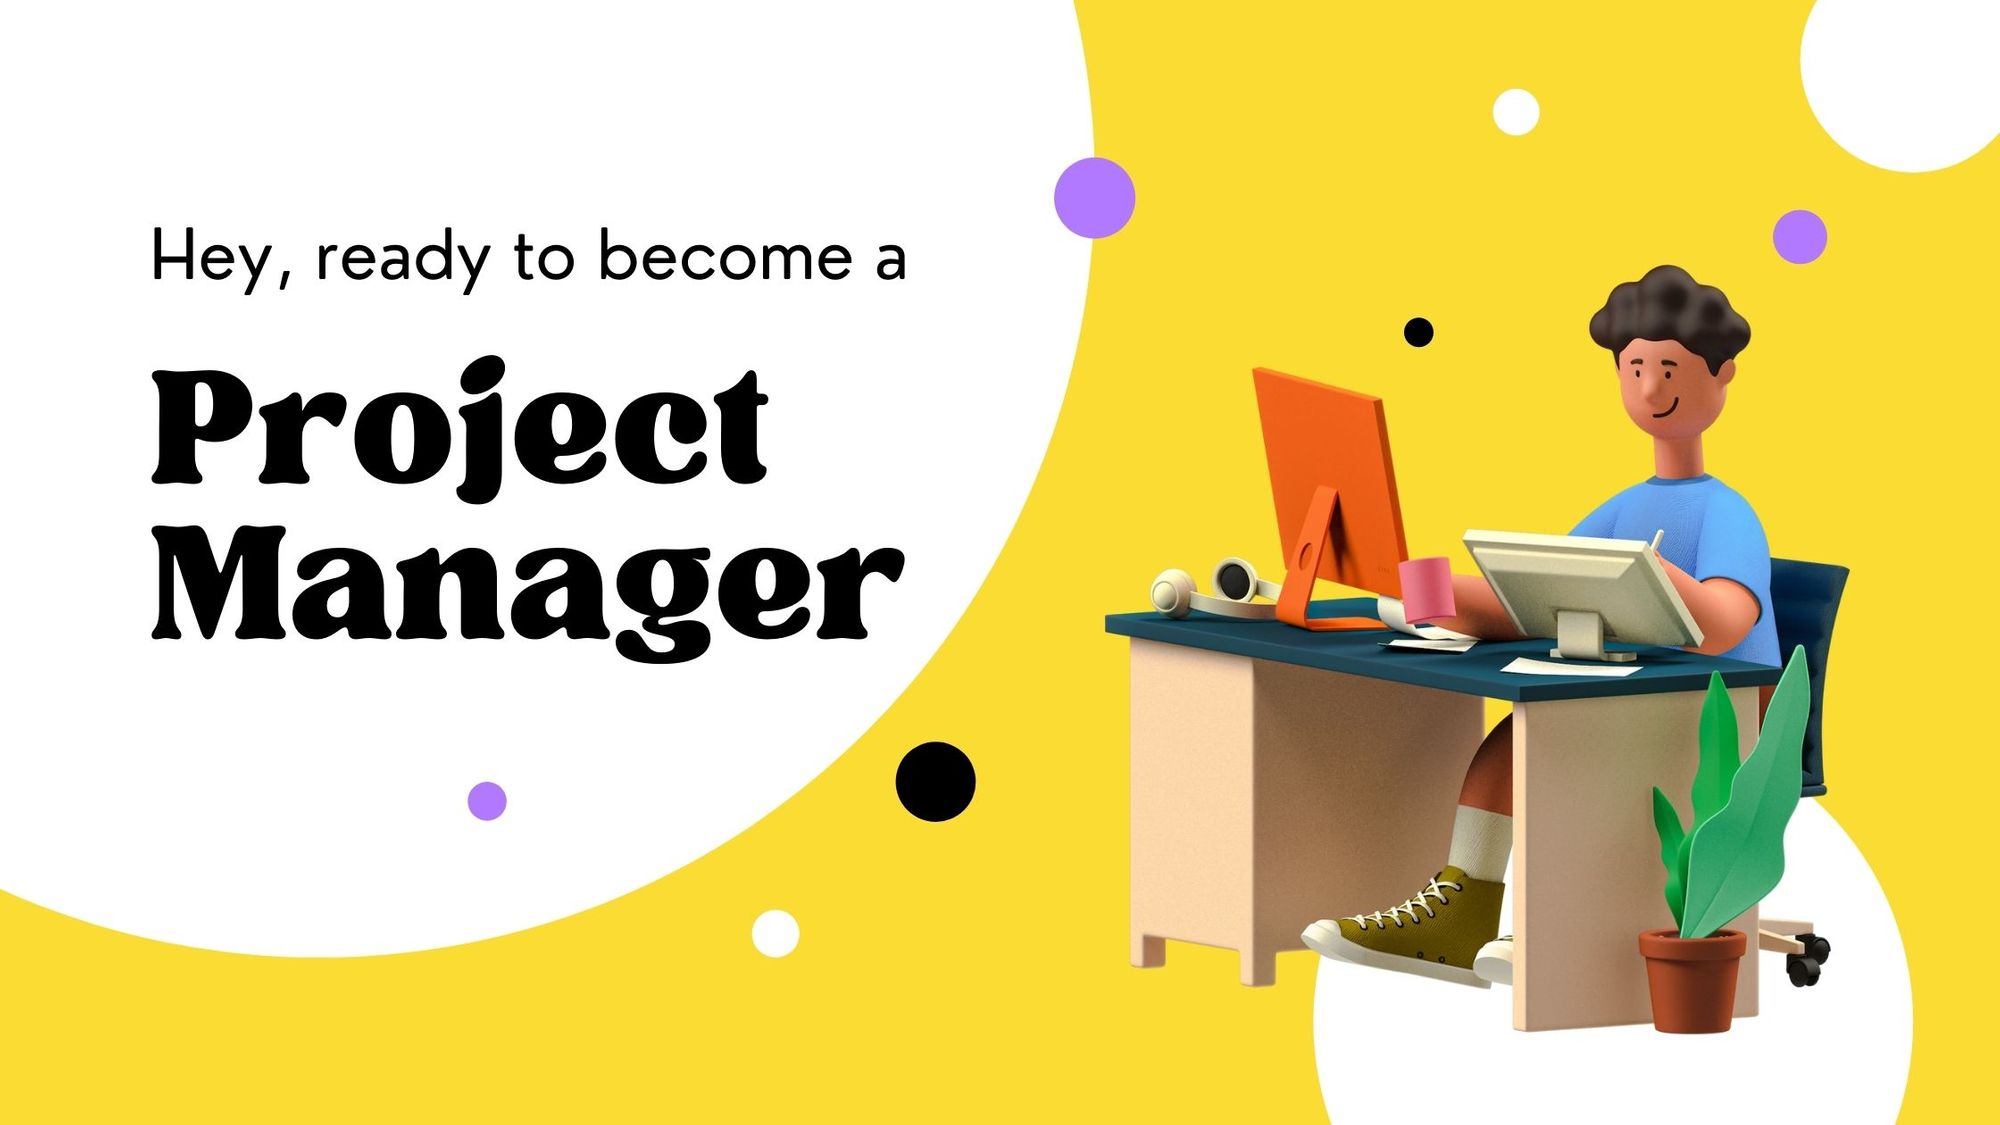 How to Become a Project Manager - The Skills You Need to Know